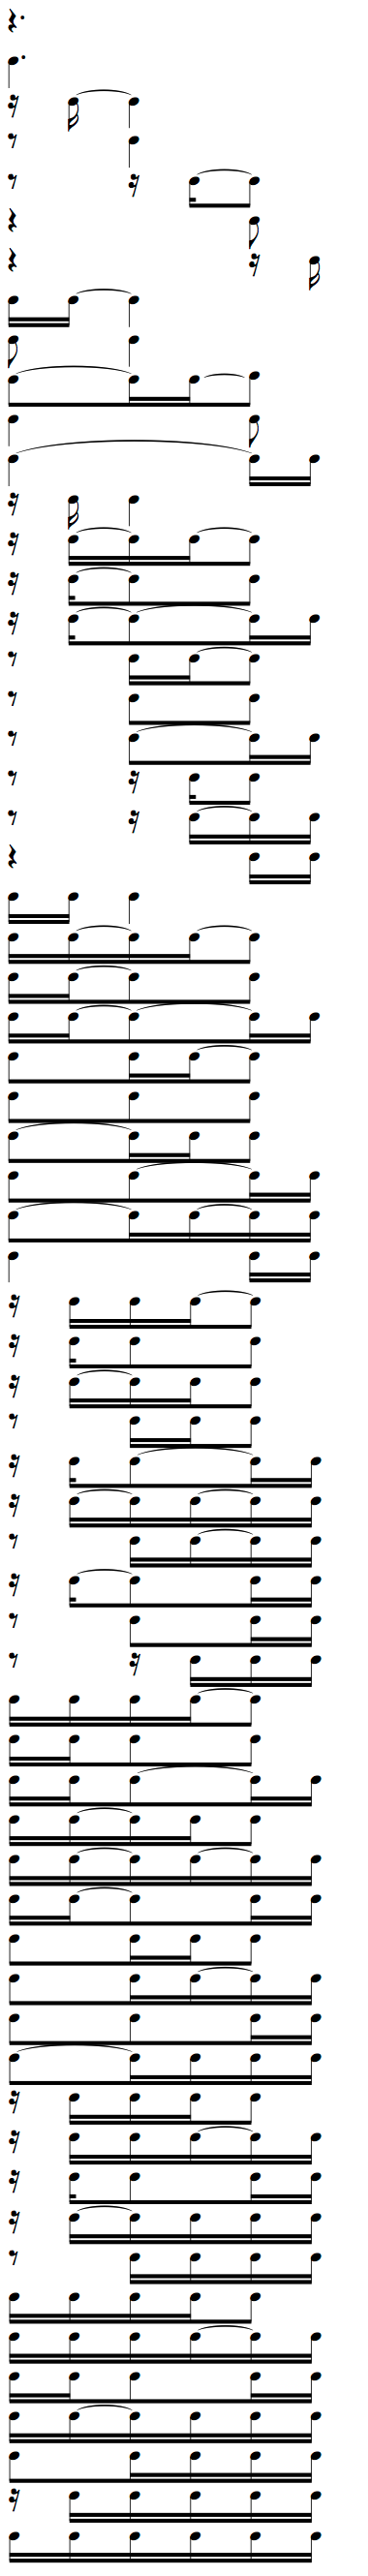 Complete Rhythms cheat sheet for Dotted Quarter Note with 16th Notes Tied Ties Weak Beat